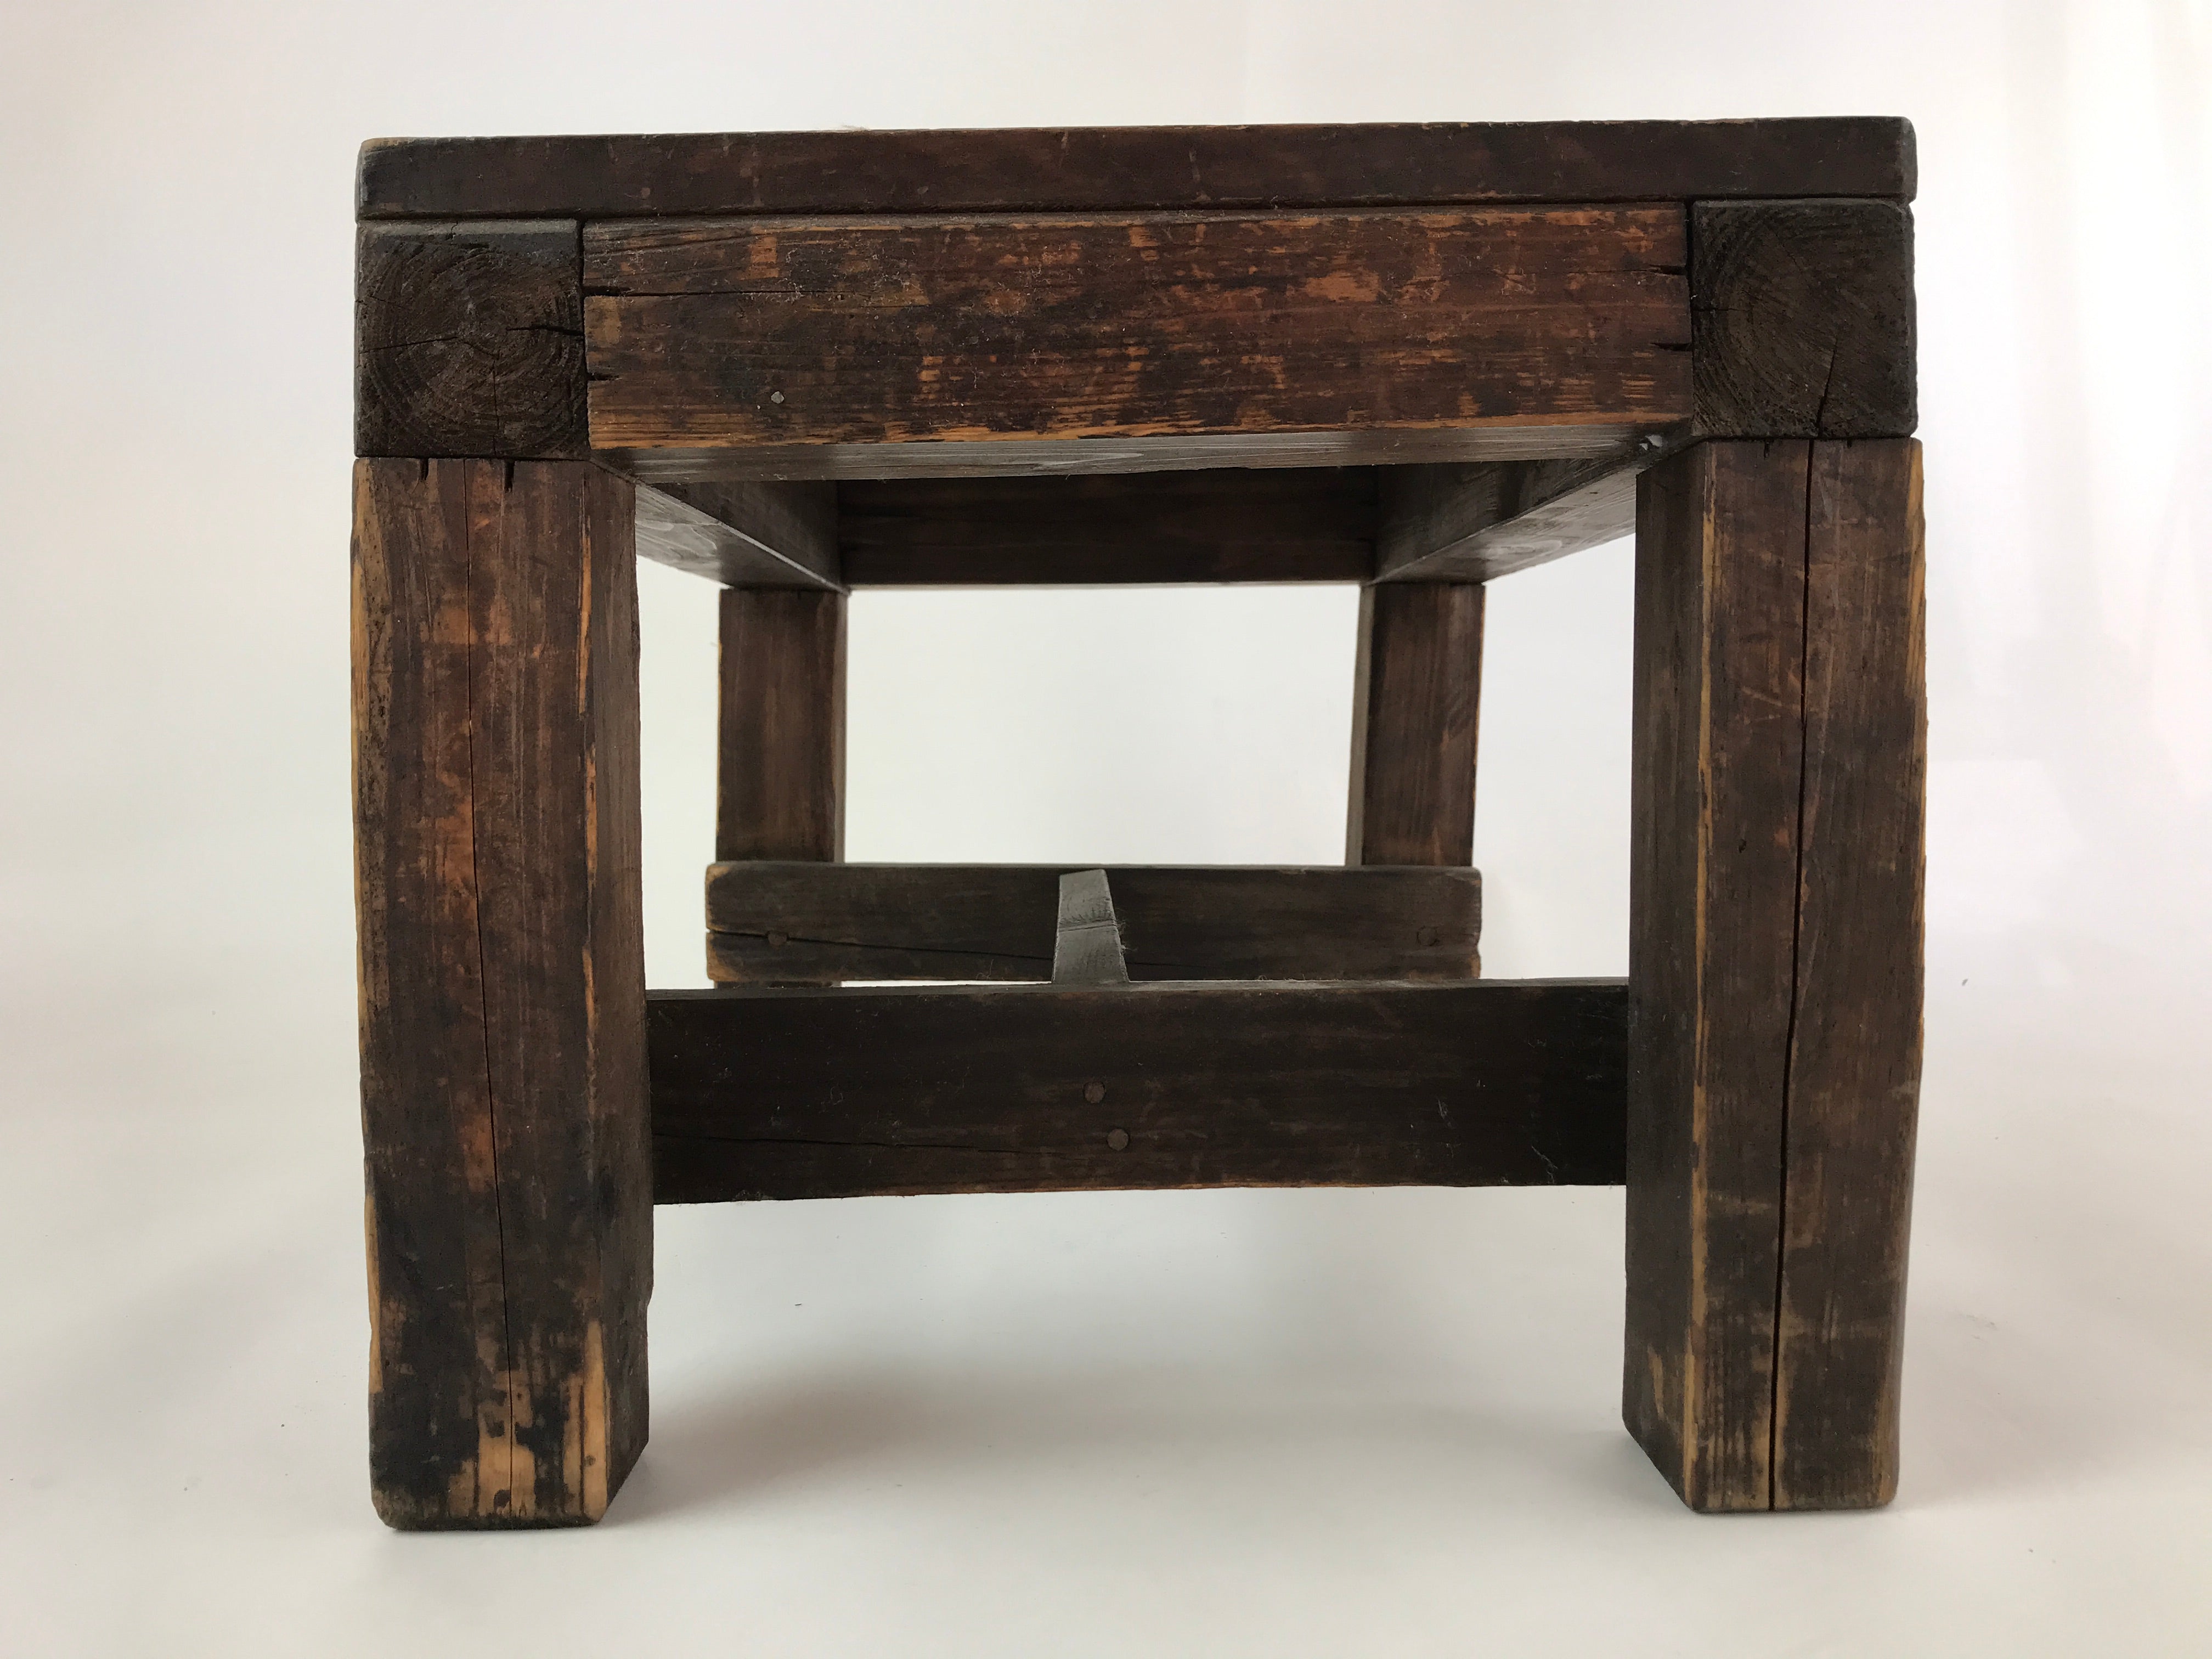 Japanese Handcrafted Wooden Bench Vtg Stool Small Table Shelf Brown JK608